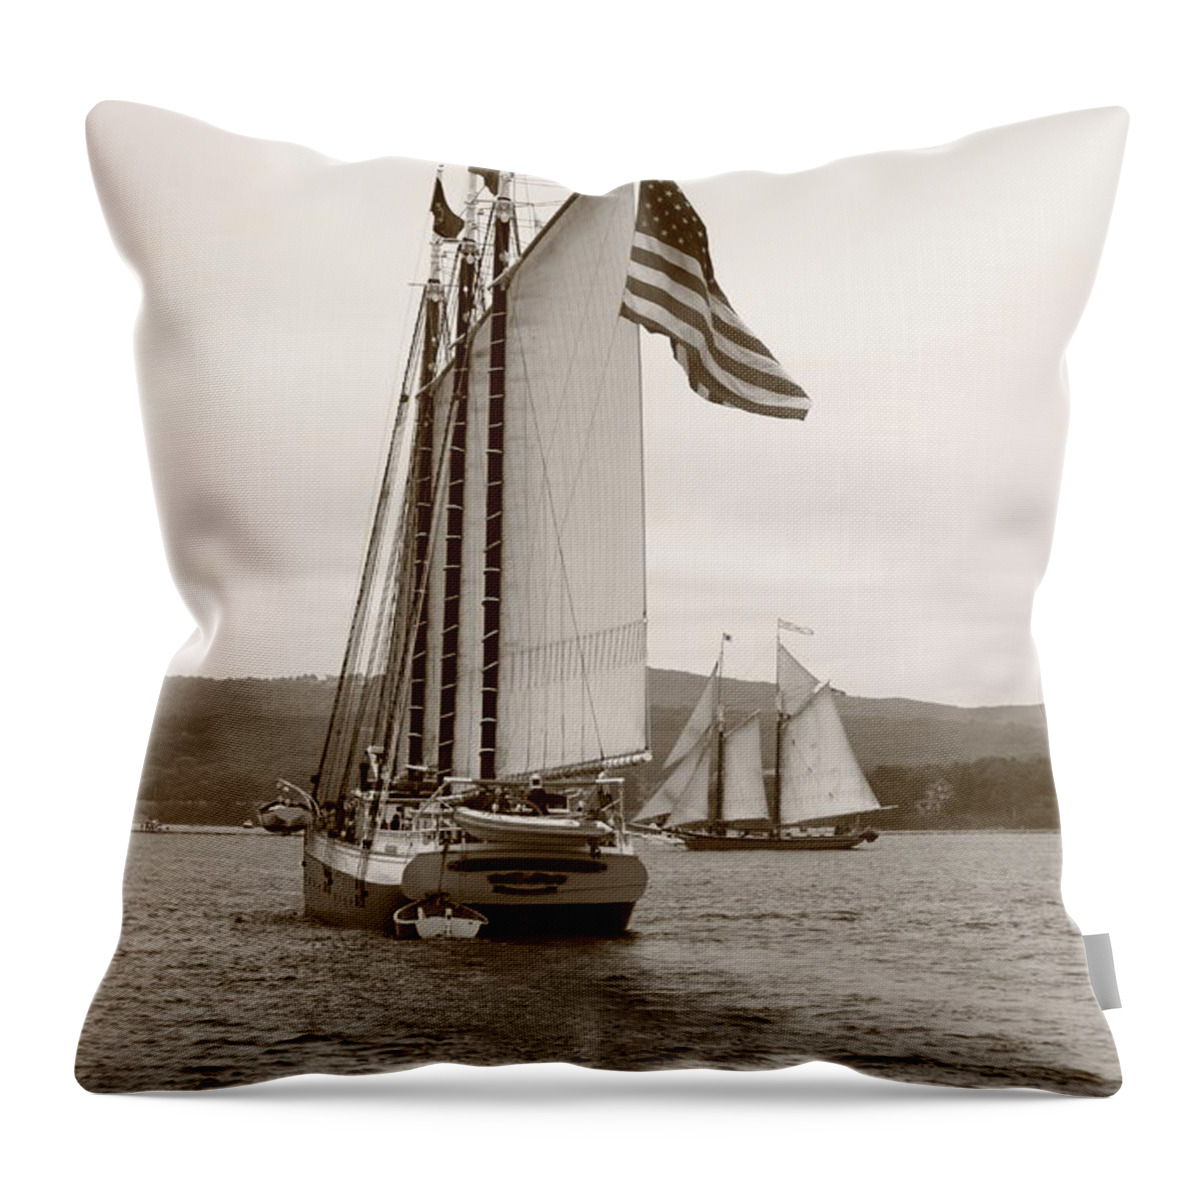 Seascape Throw Pillow featuring the photograph Lewis R French And Victory Chimes #1 by Doug Mills